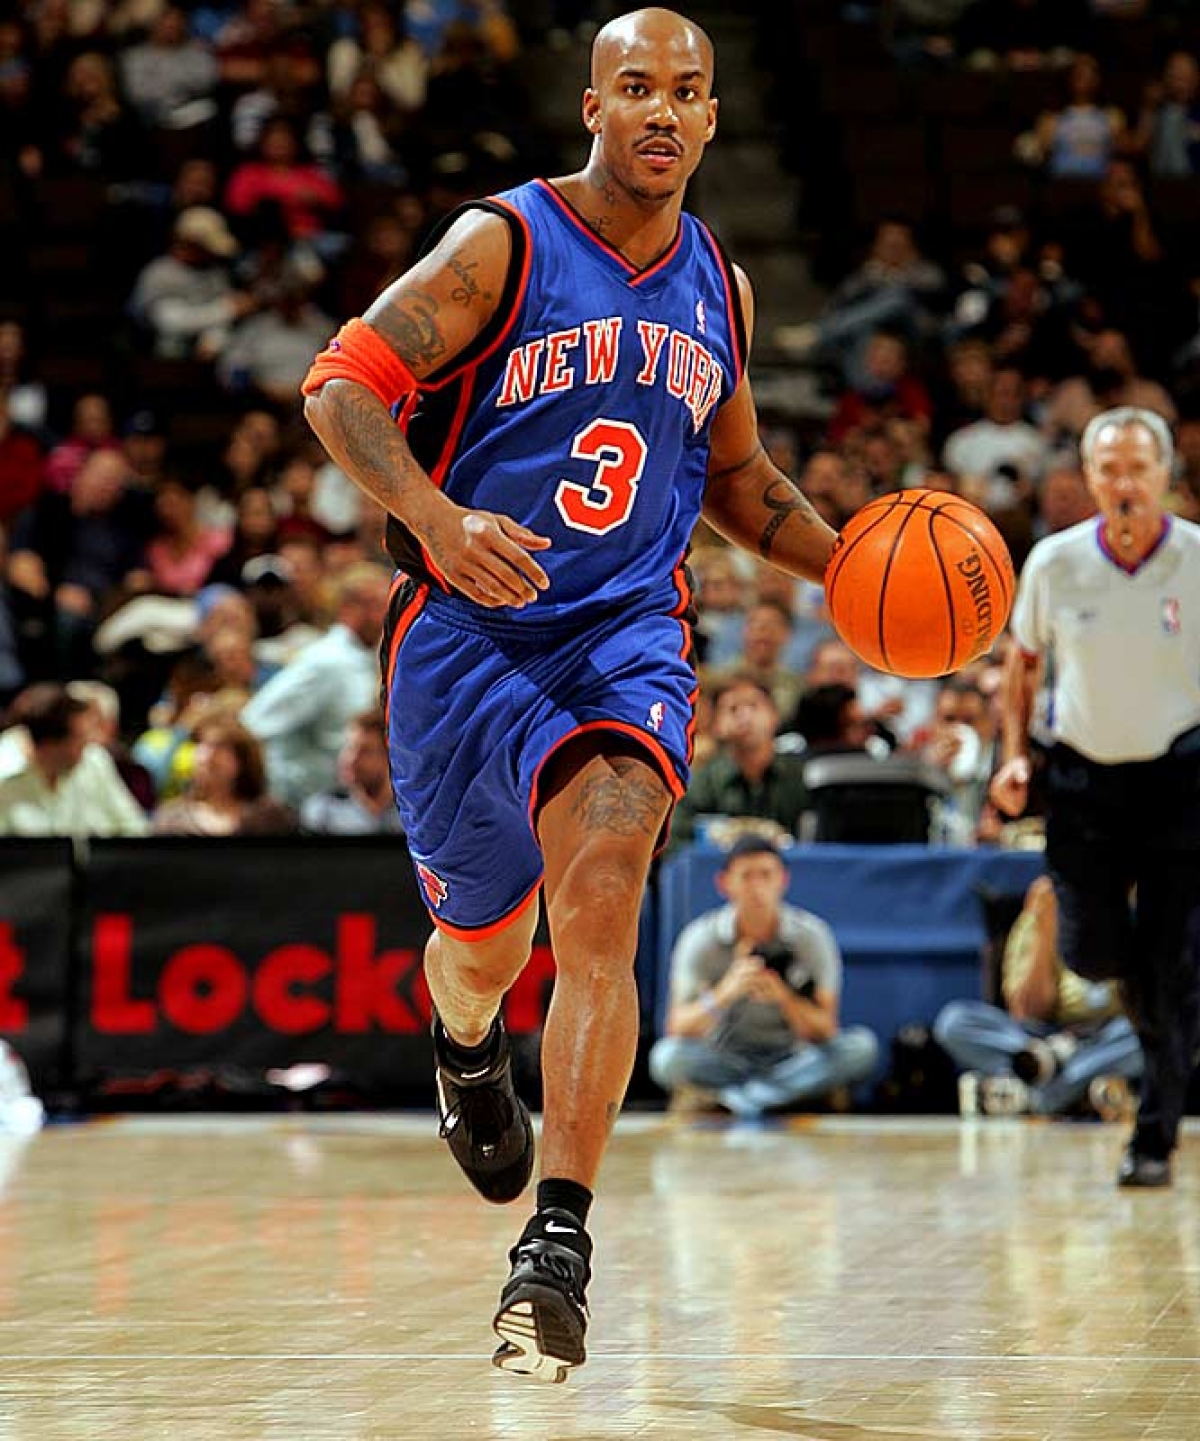 Nets All-Time Top 25: No. 25 Stephon Marbury